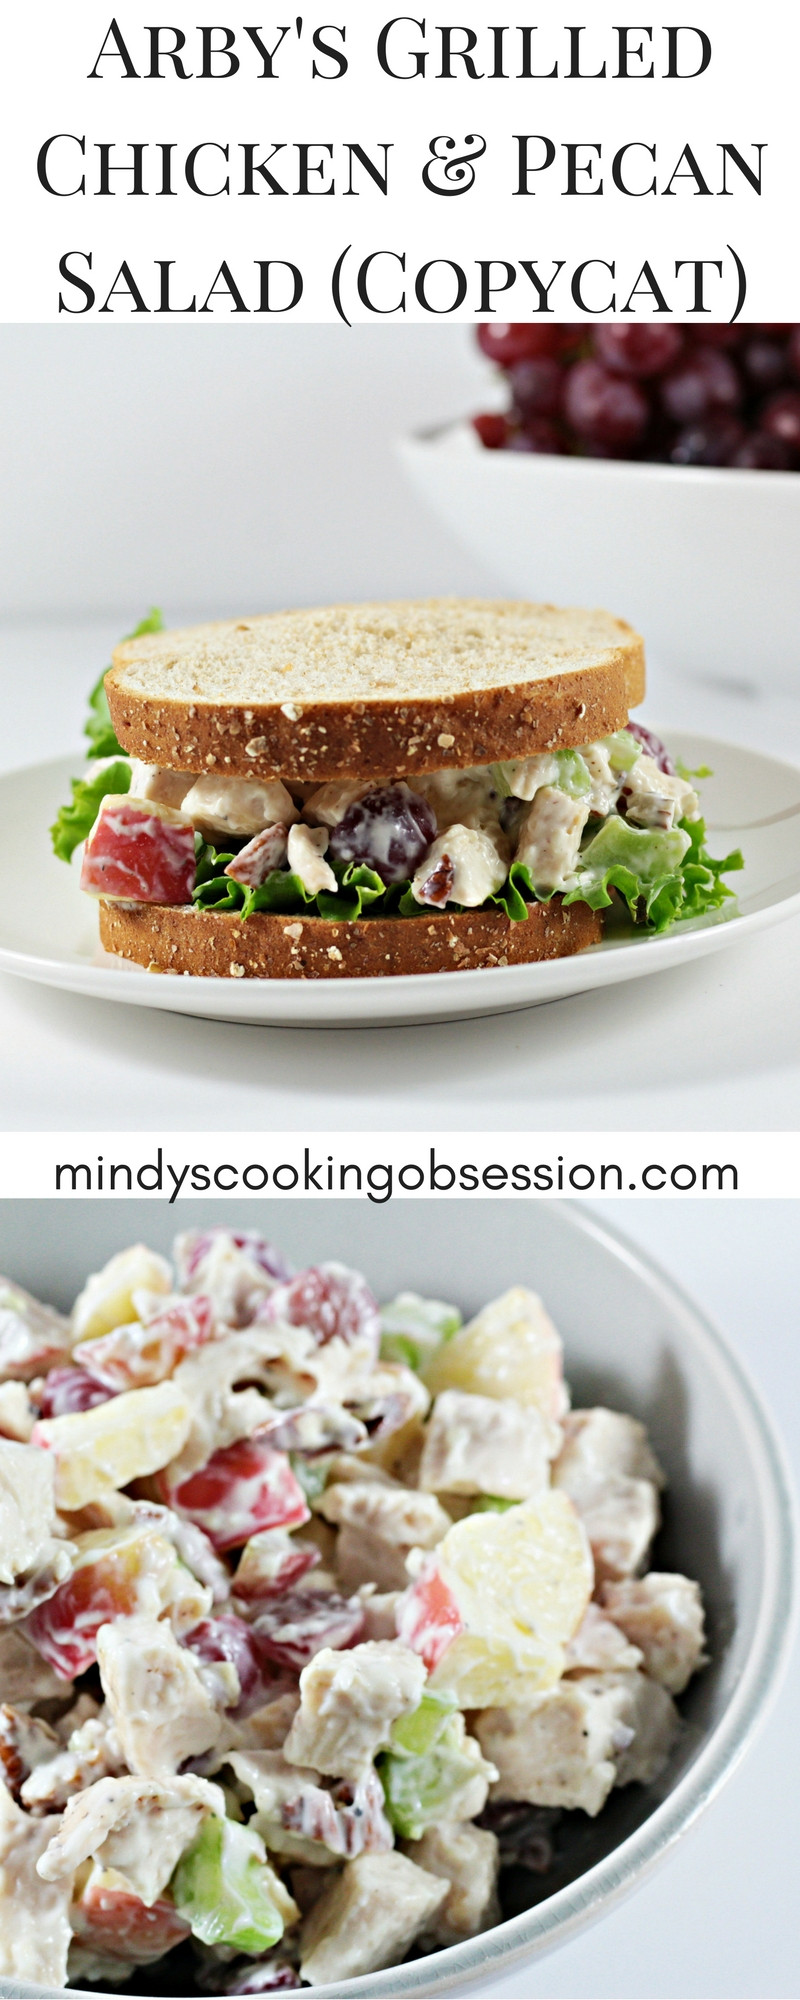 Chicken Salad Sandwich Recipe With Grapes And Pecans
 Arby s Grilled Chicken & Pecan Salad Copycat Mindy s